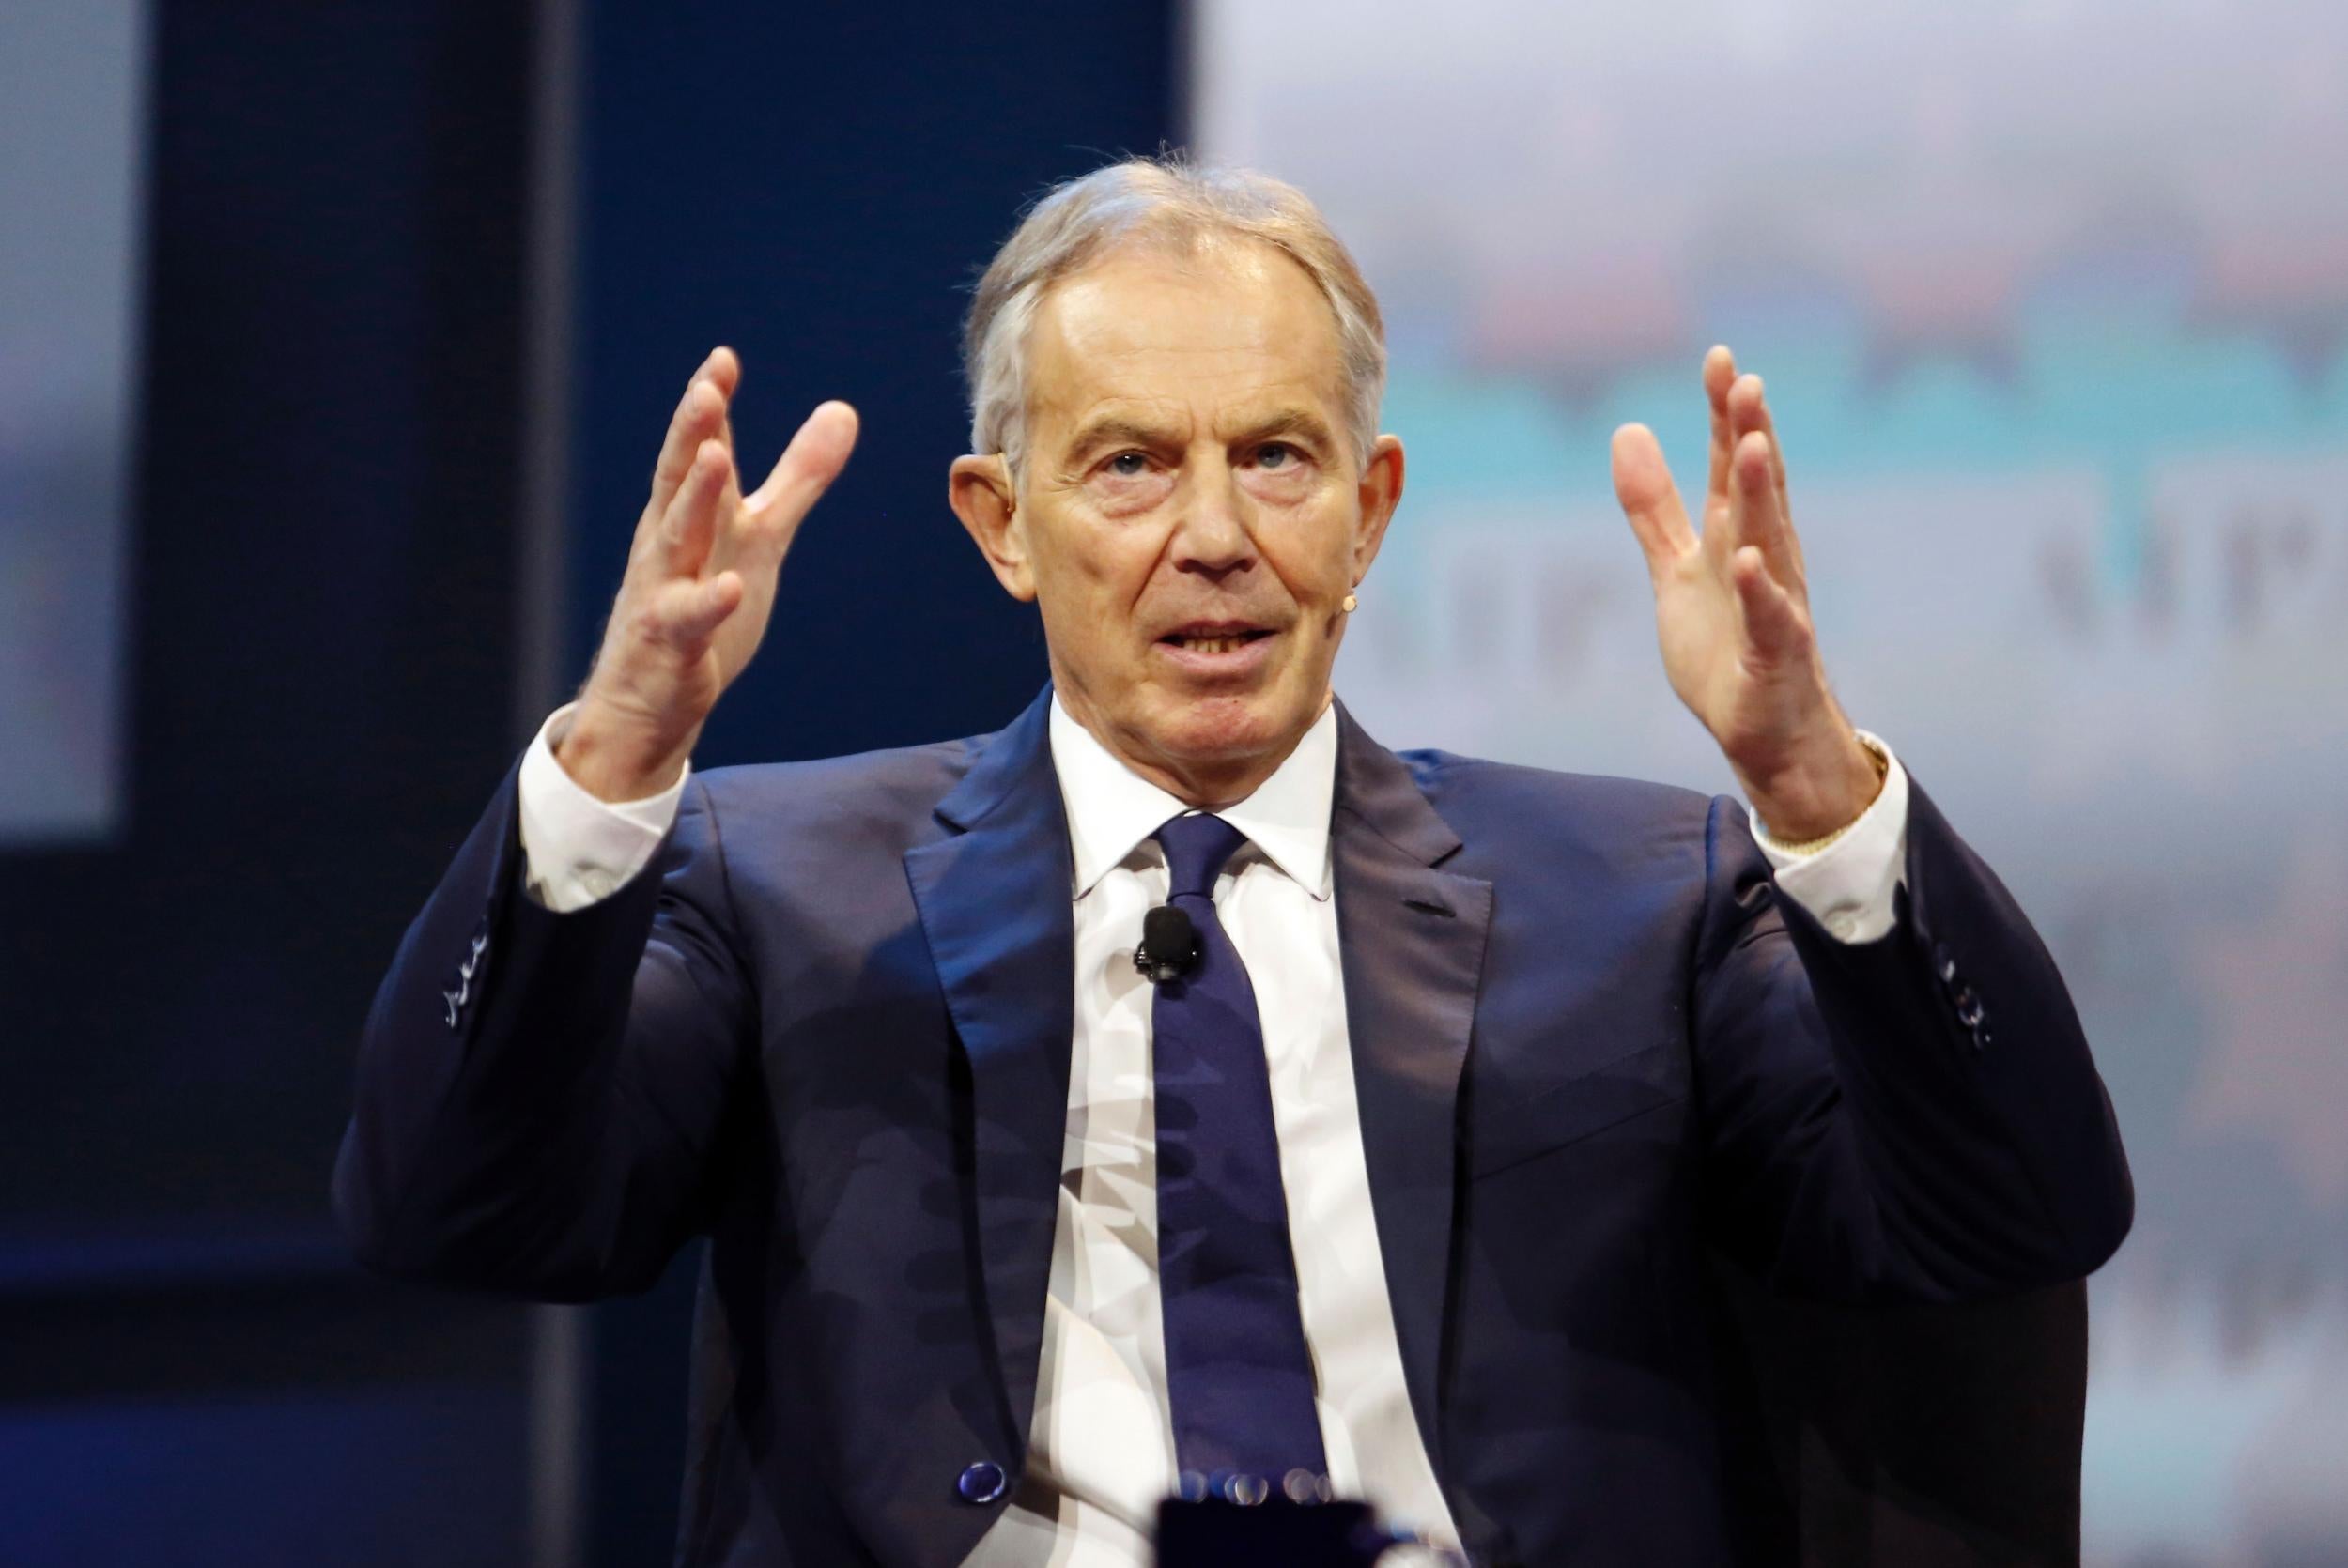 'Ignoring the Brexit issue or trying to play it down as one issue out of many just won’t work,' Mr Blair said